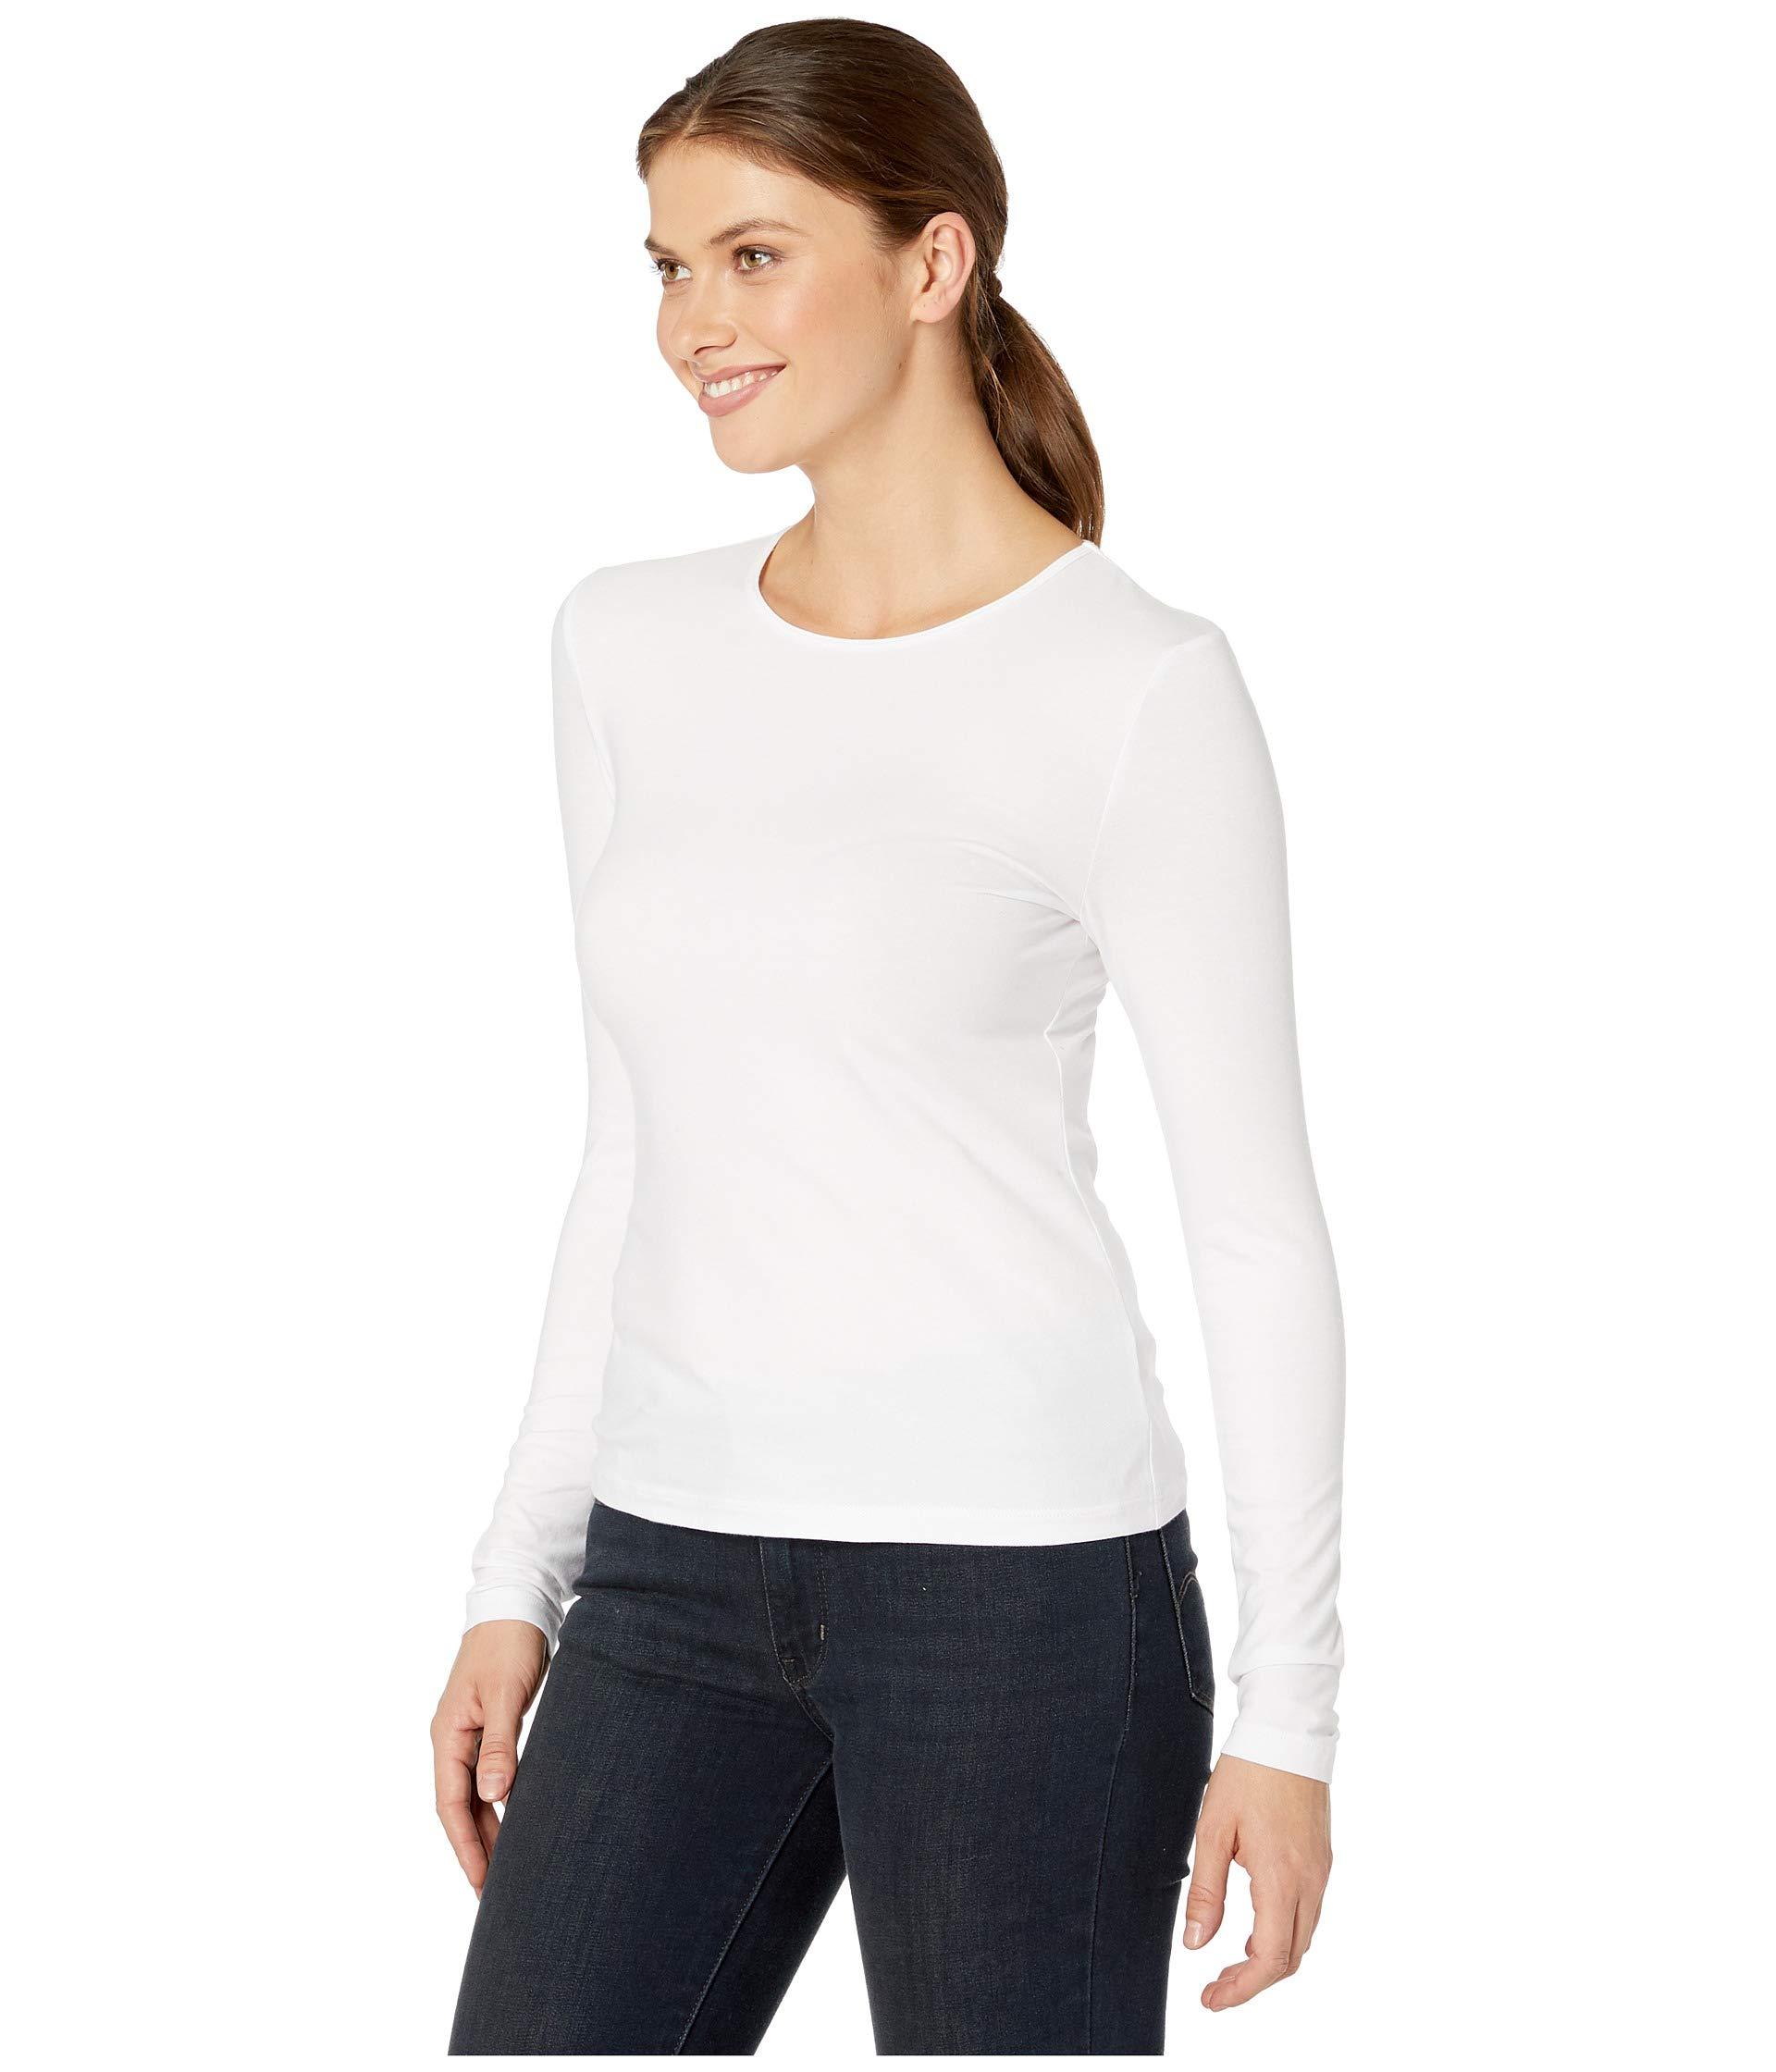 Lilla P Cotton Stretch Layering Long Sleeve Crew Neck Tee in White - Lyst